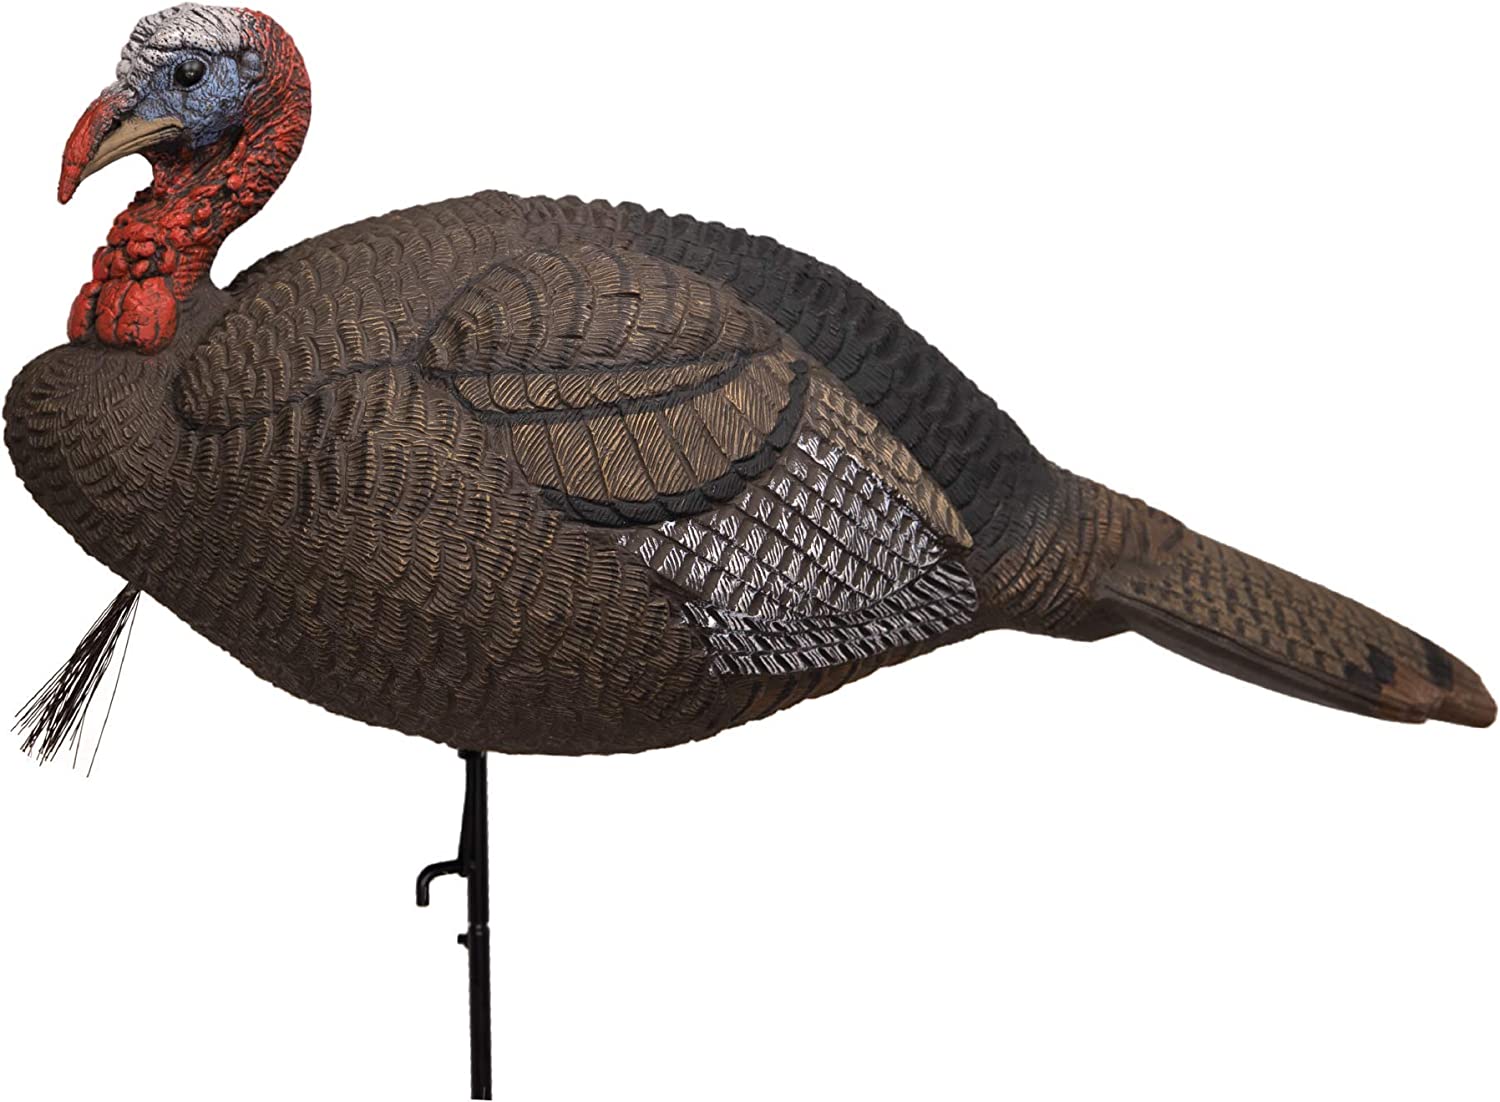 Turkey Bow Hunting – Opening Day April 25